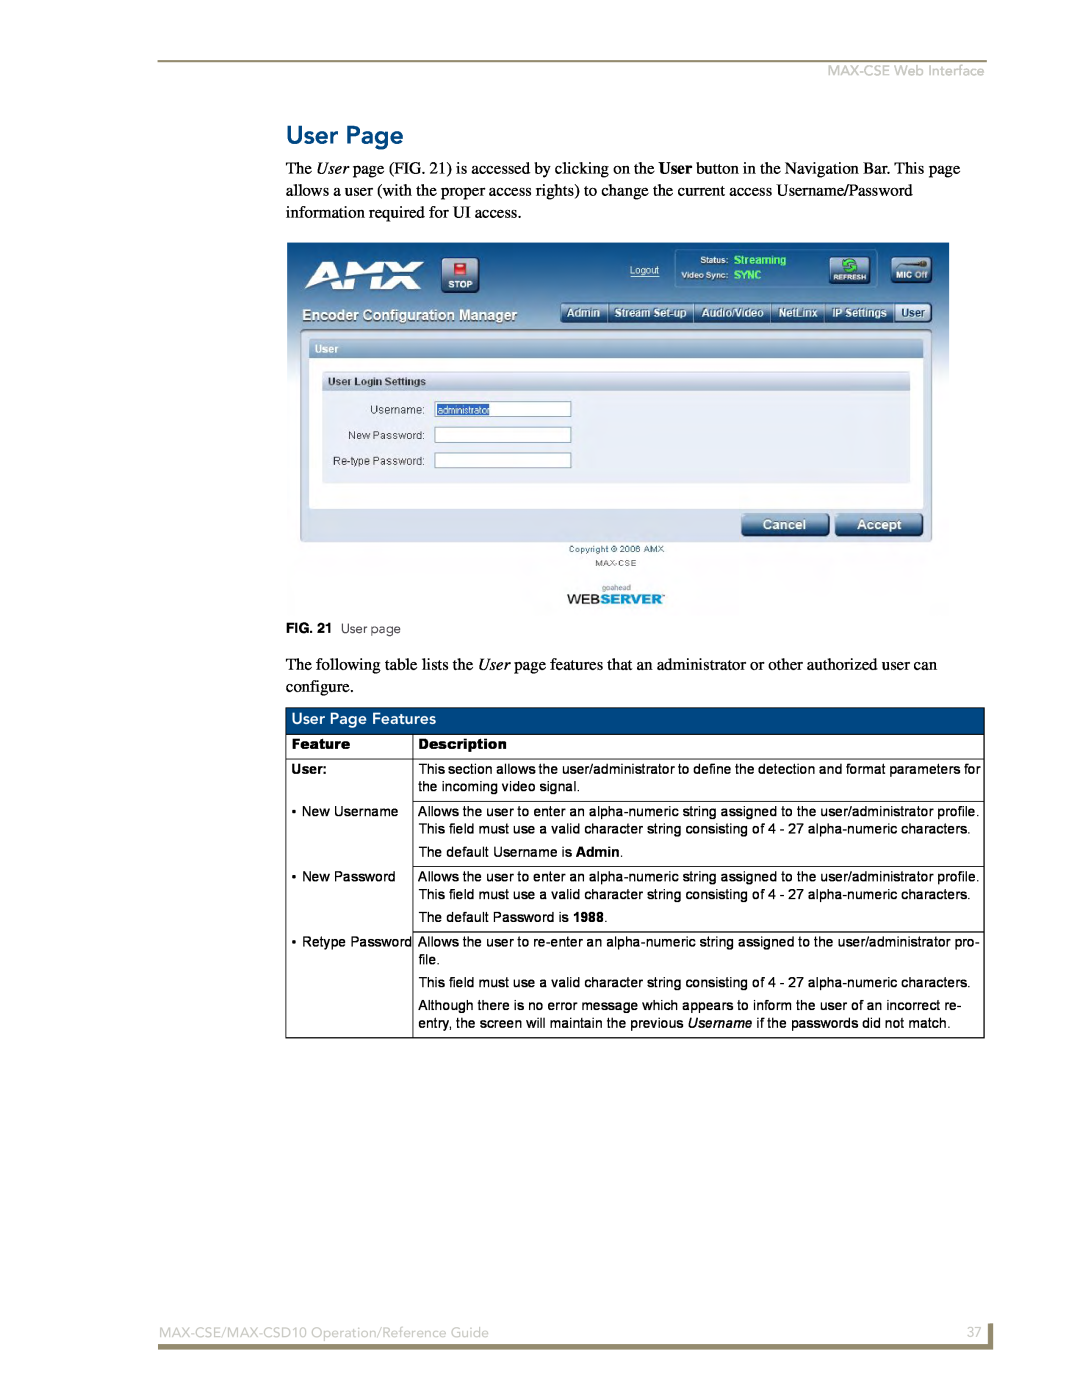 AMX MAX-CSD 10, MAX-CSE manual User Page Features 